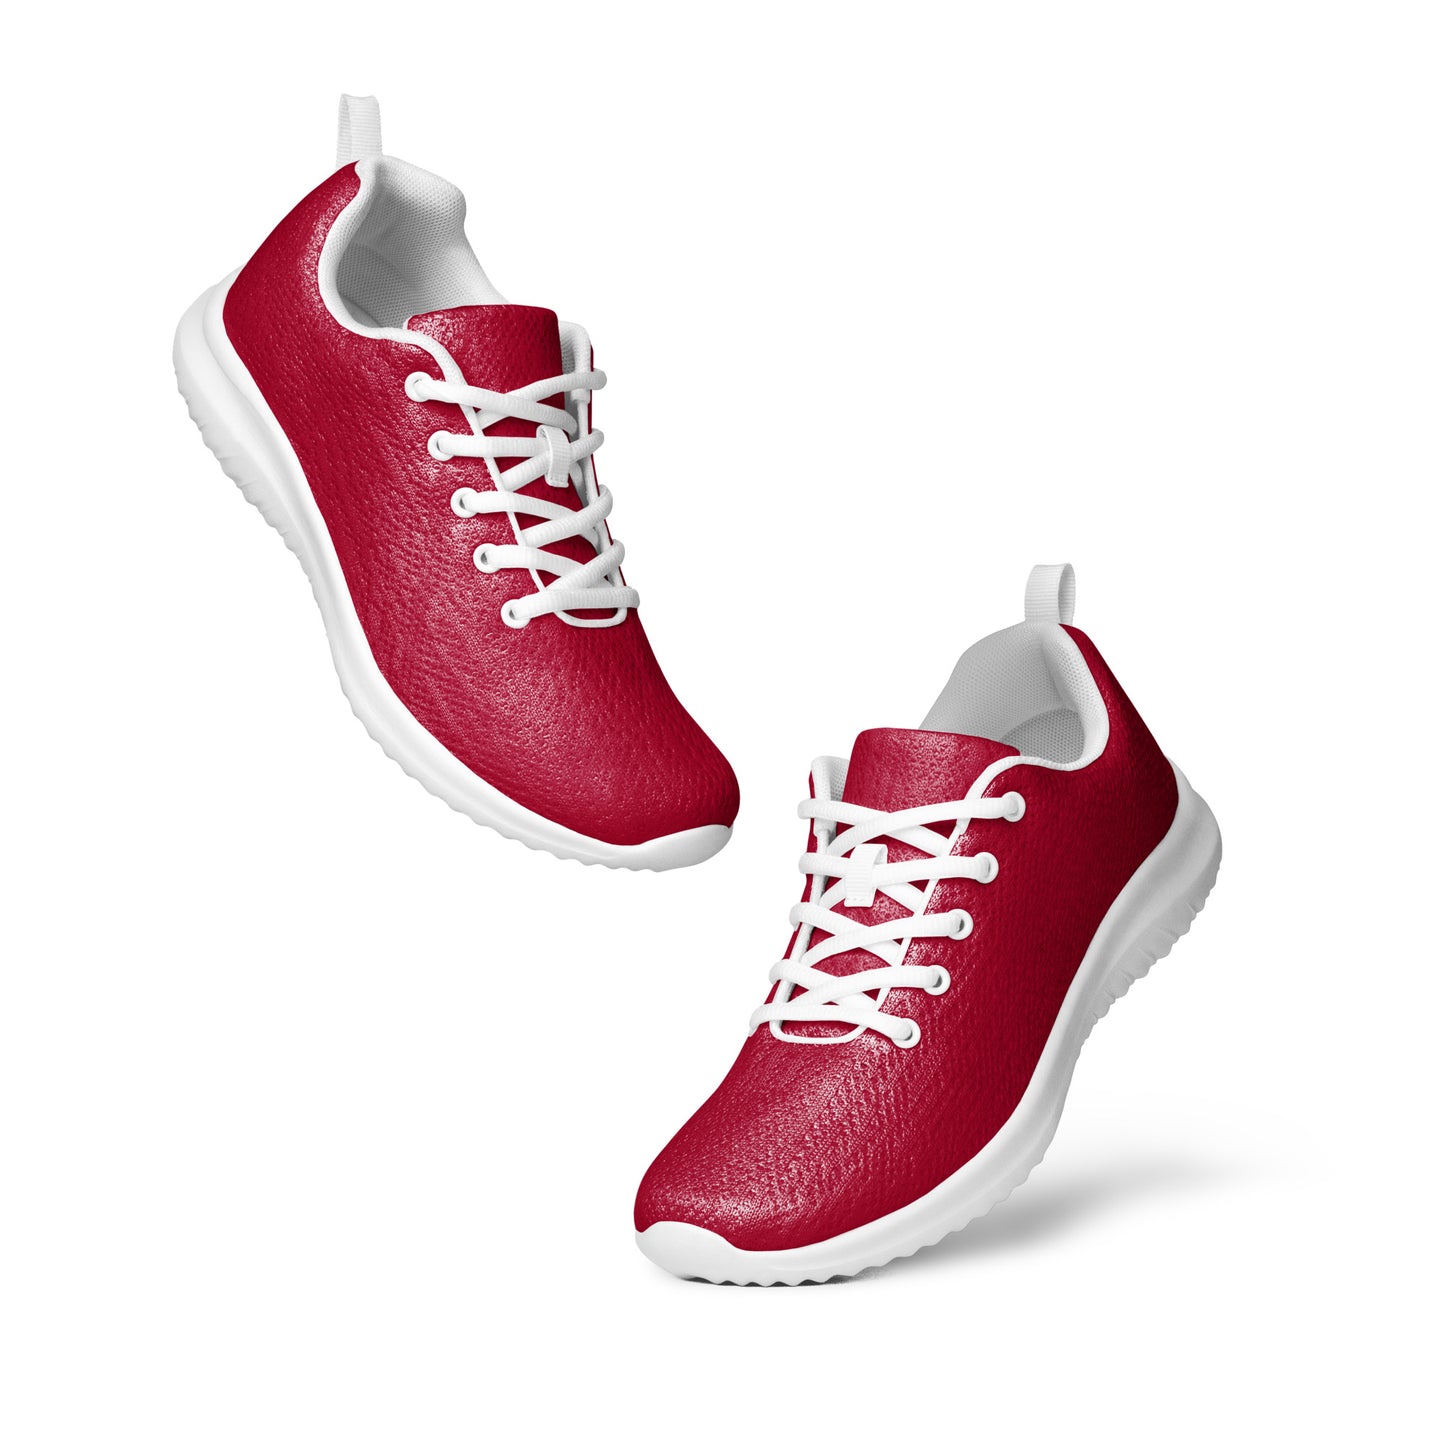 DASH Wine Red Women’s Athletic Shoes Lightweight Breathable Design by IOBI Original Apparel